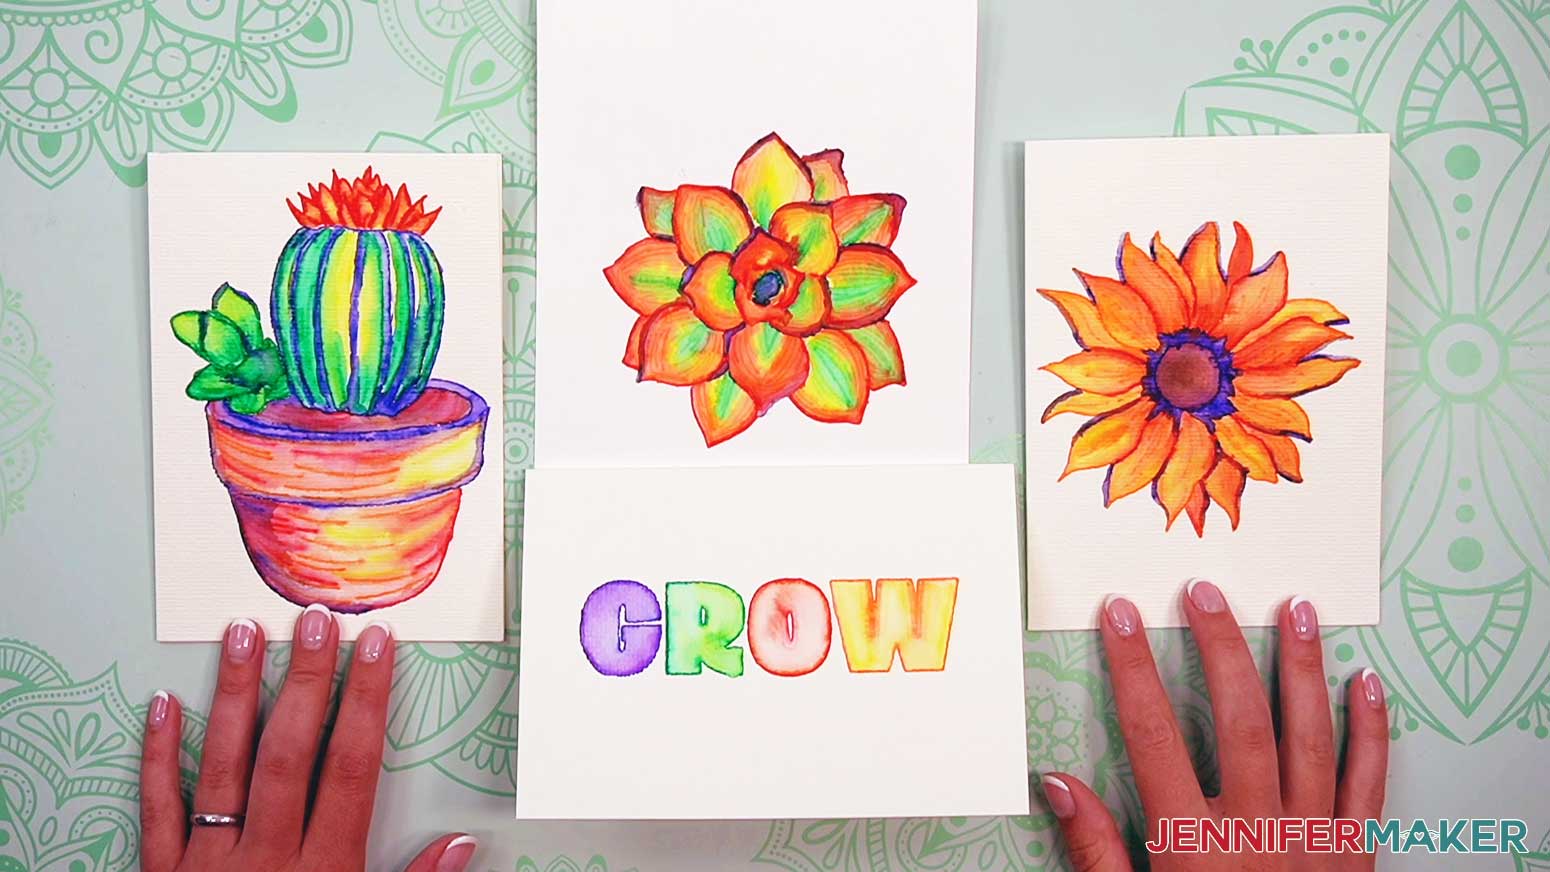 Show off your watercolor plants by displaying them on cards.